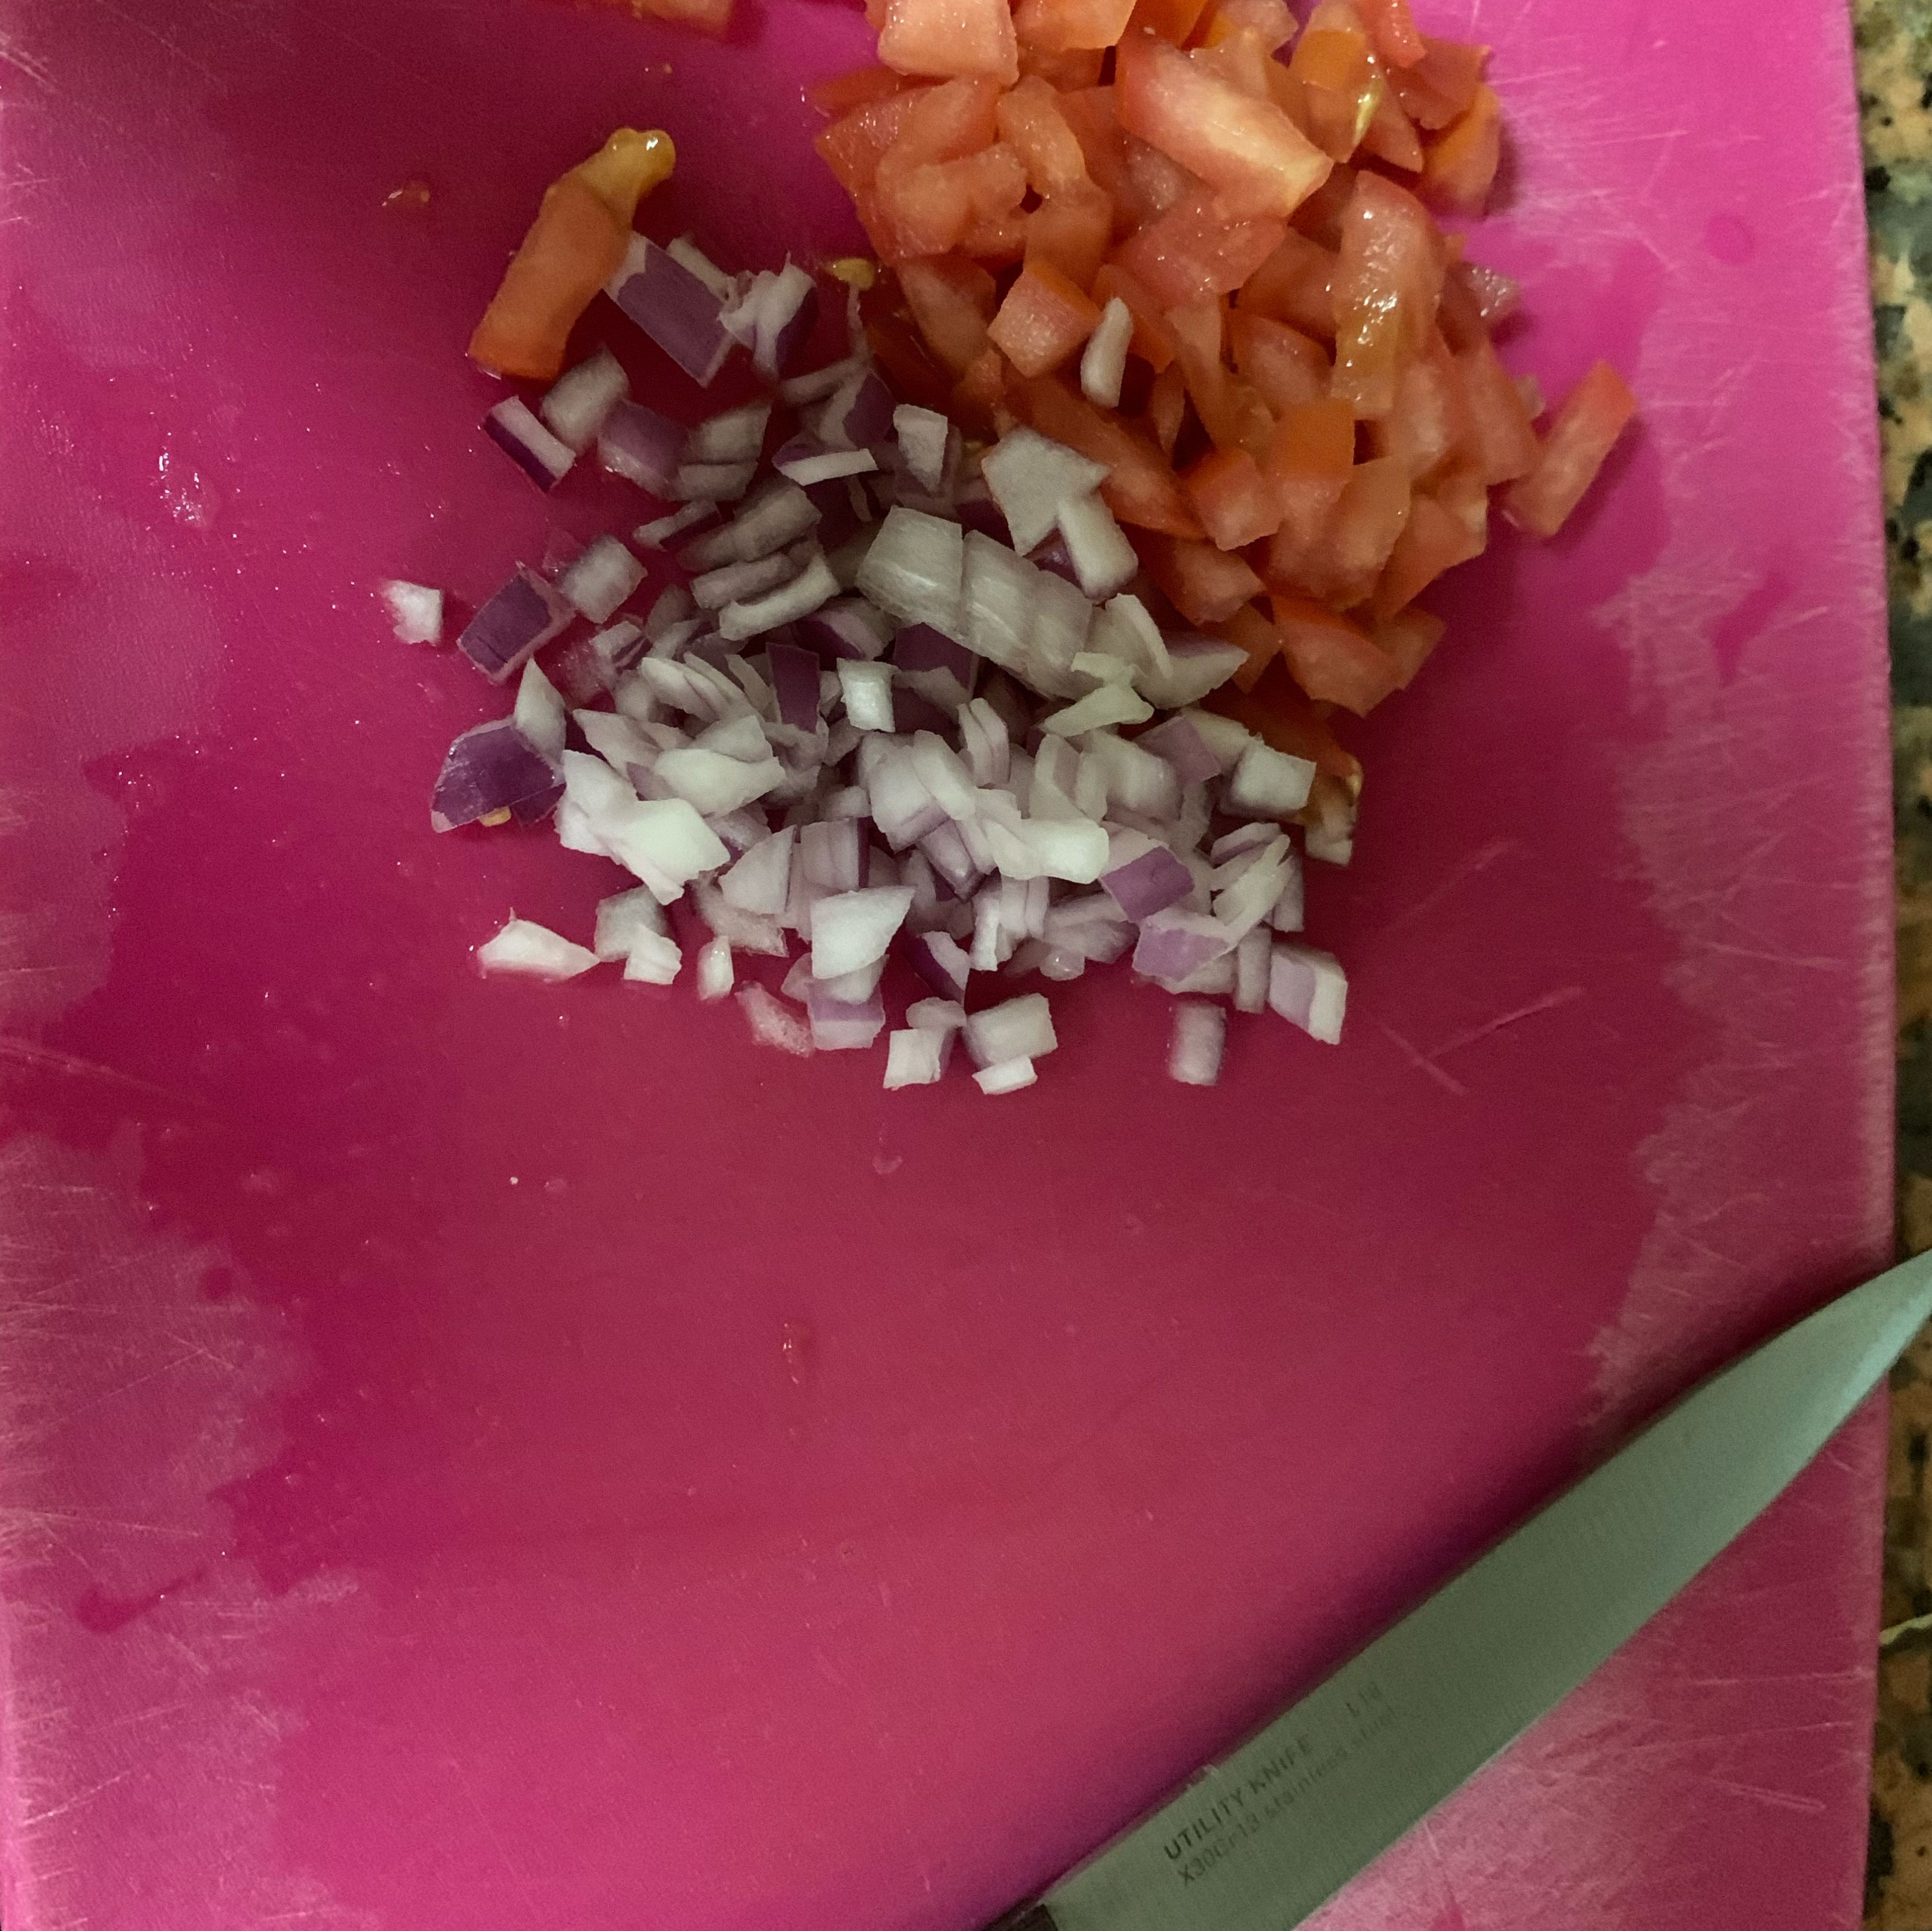 Cut the tomato and onion into small Cubs